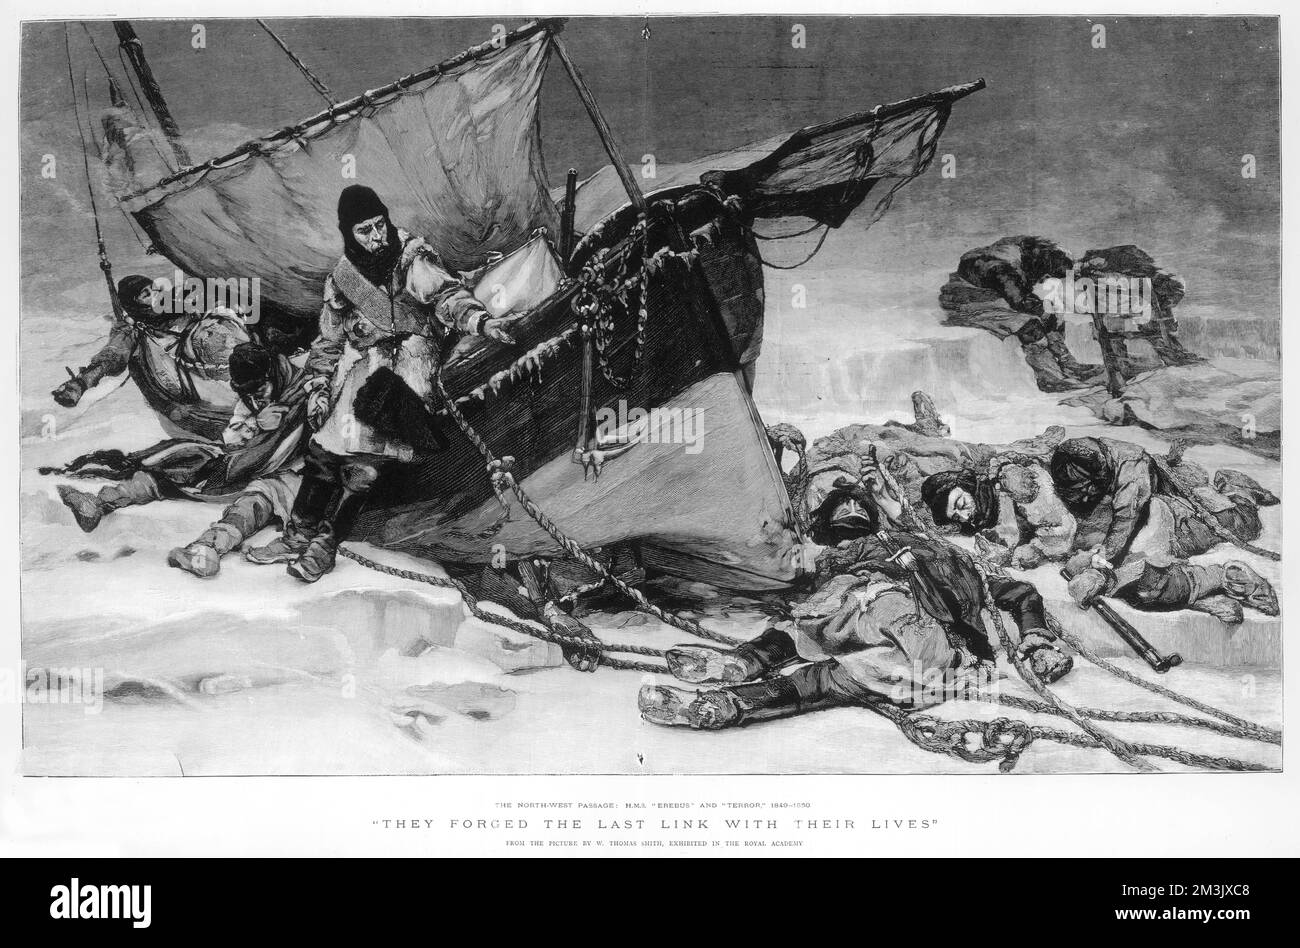 Engraving showing the end of Sir John Franklin's ill-fated Arctic expedition of 1845, entitled 'They Forged the last link with their lives'. This engraving was taken from a painting by W. Thomas Smith, exhibited in the Royal Academy in 1896.  In 1845 the British Admiralty sent two polar exploration ships, HMS 'Erebus' and HMS 'Terror', to look for the Northwest passage round the northern coast of Canada. The expedition, commanded by Sir John Franklin, disappeared from view late in 1845 and none of the men were ever seen again.   In fact the ships made it to the King William Island region, then Stock Photo